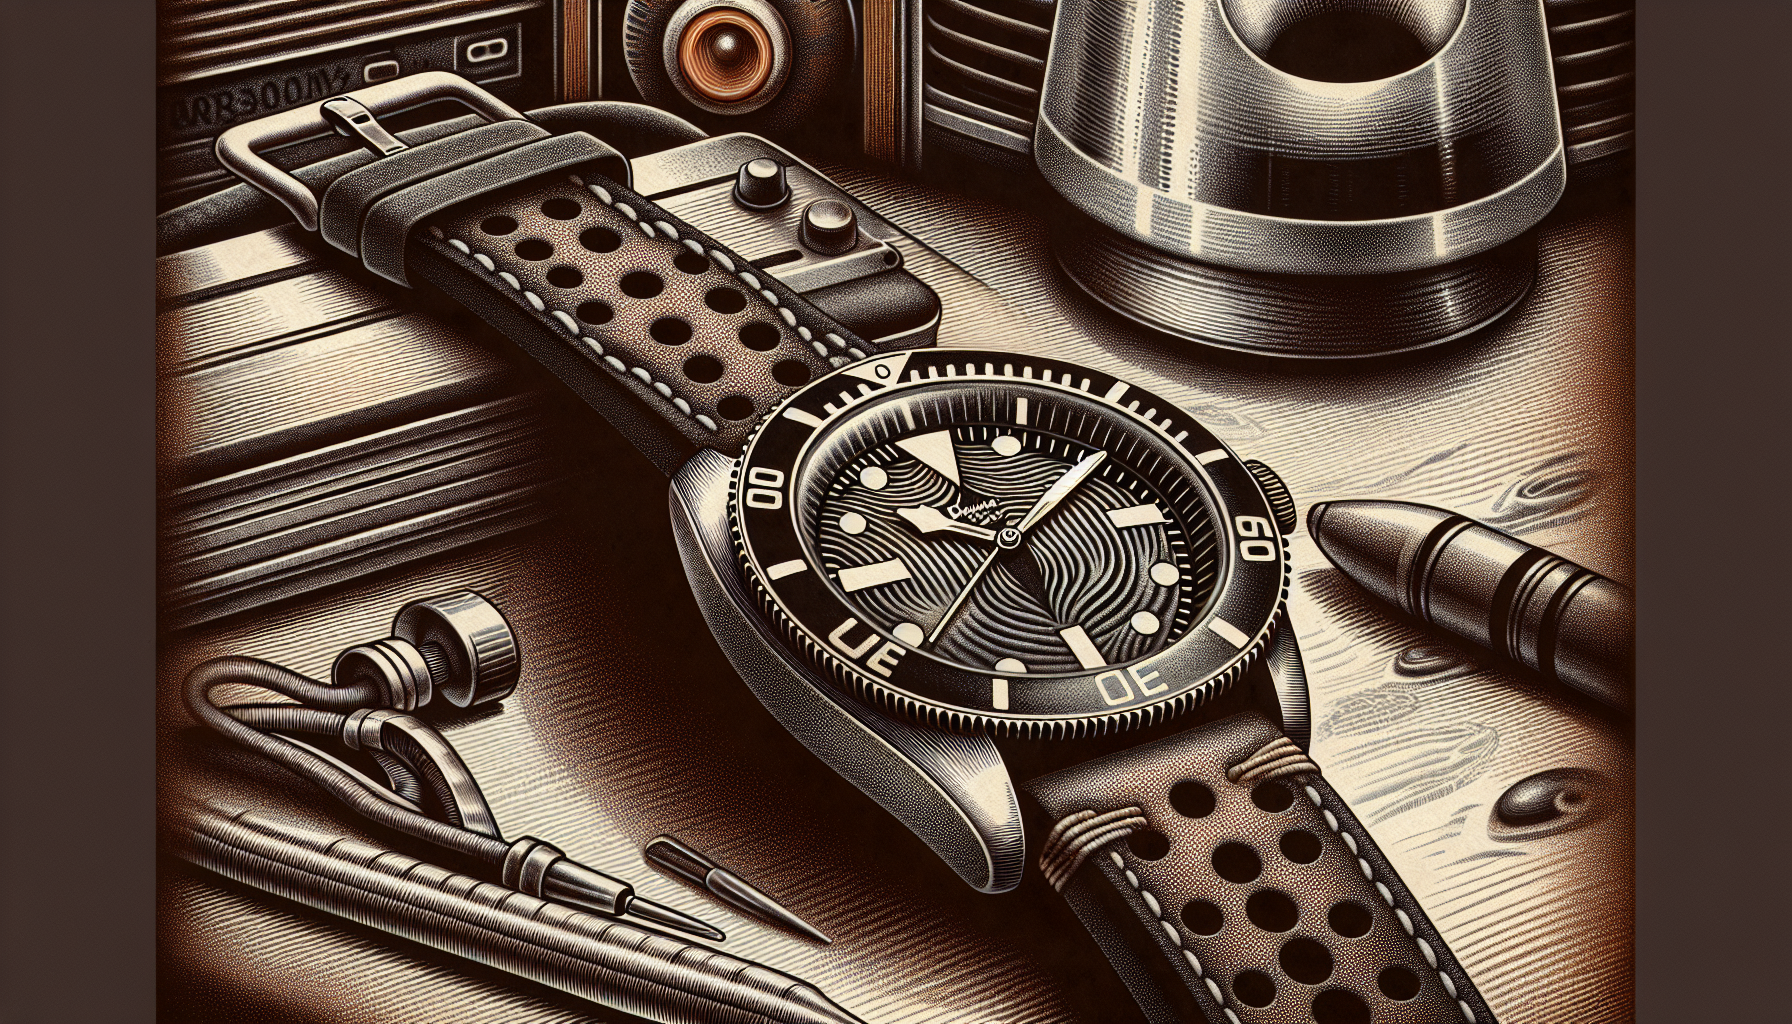 Illustration of vintage dive watch with Tropic watch strap